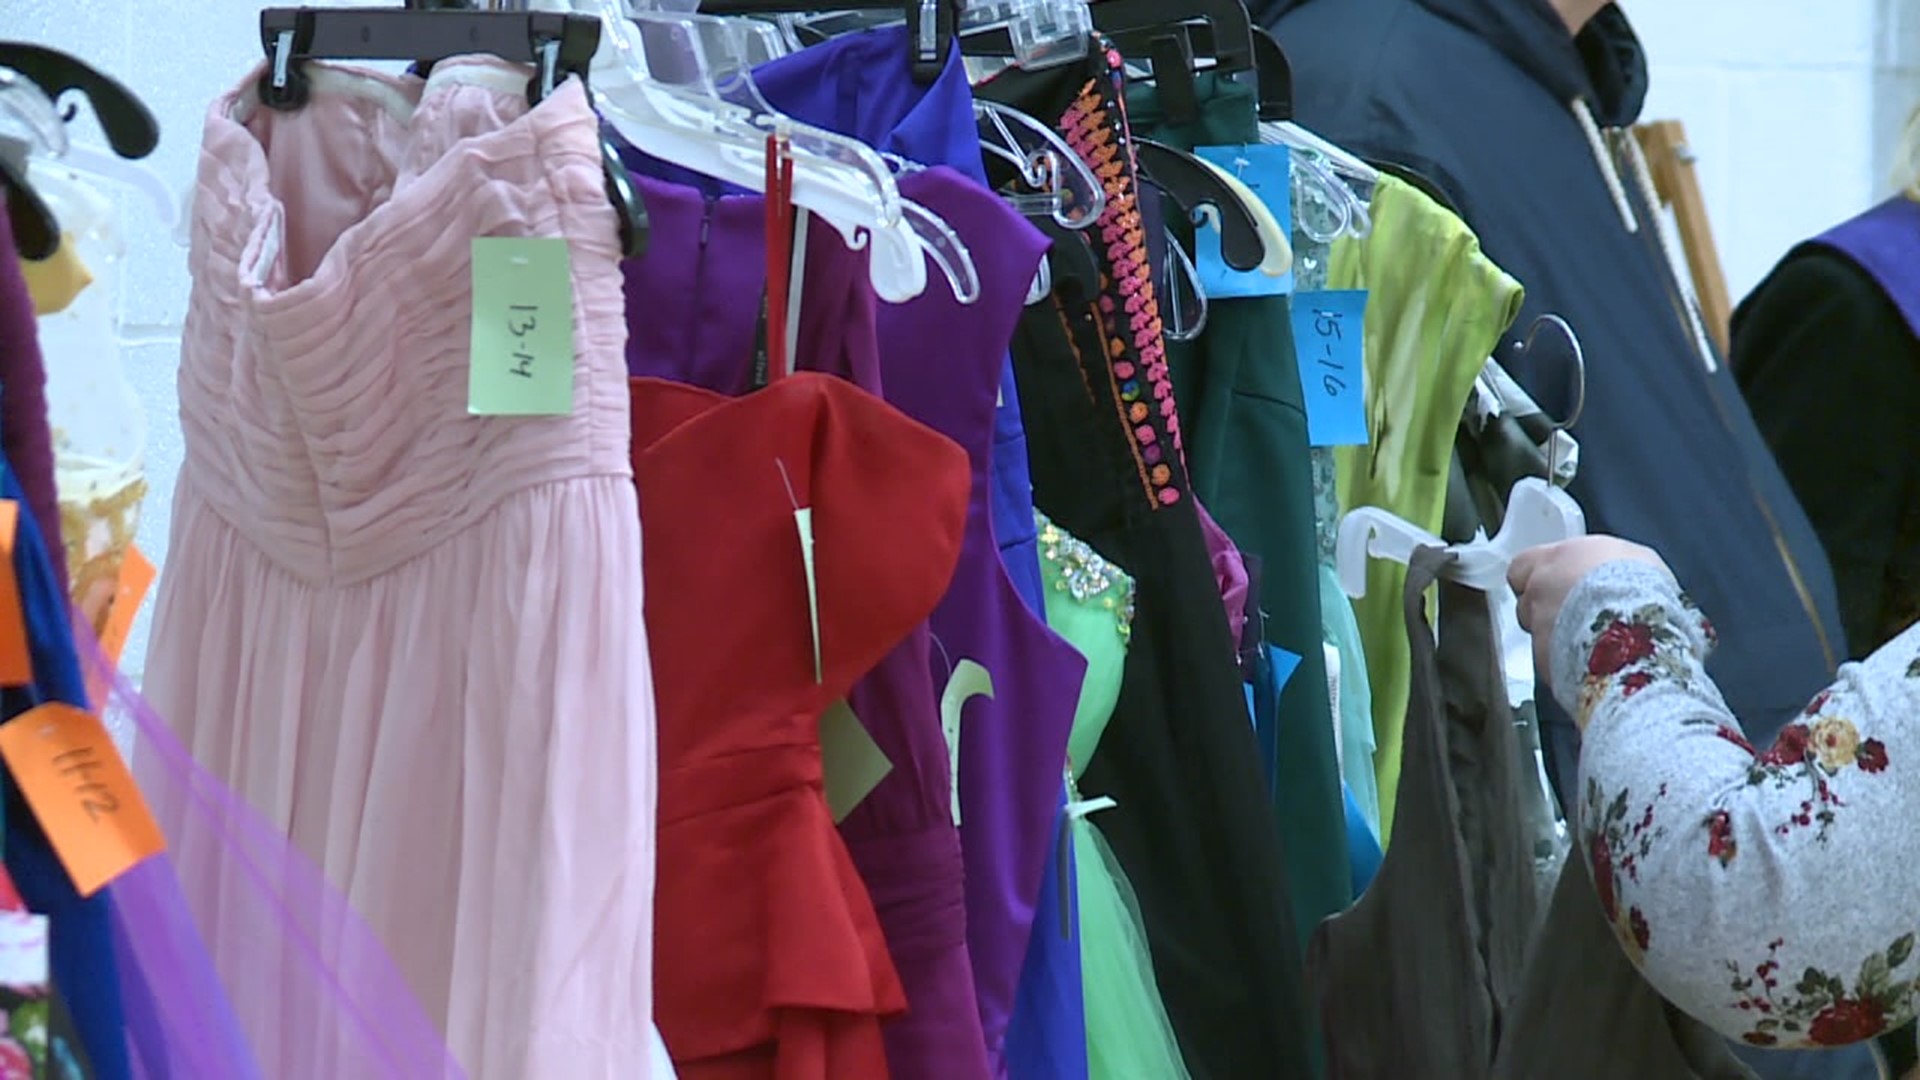 Before the final dresses fly off the shelf, Newswatch 16’s Claire Alfree sat down with one woman who got so much more than a dress from the nonprofit.